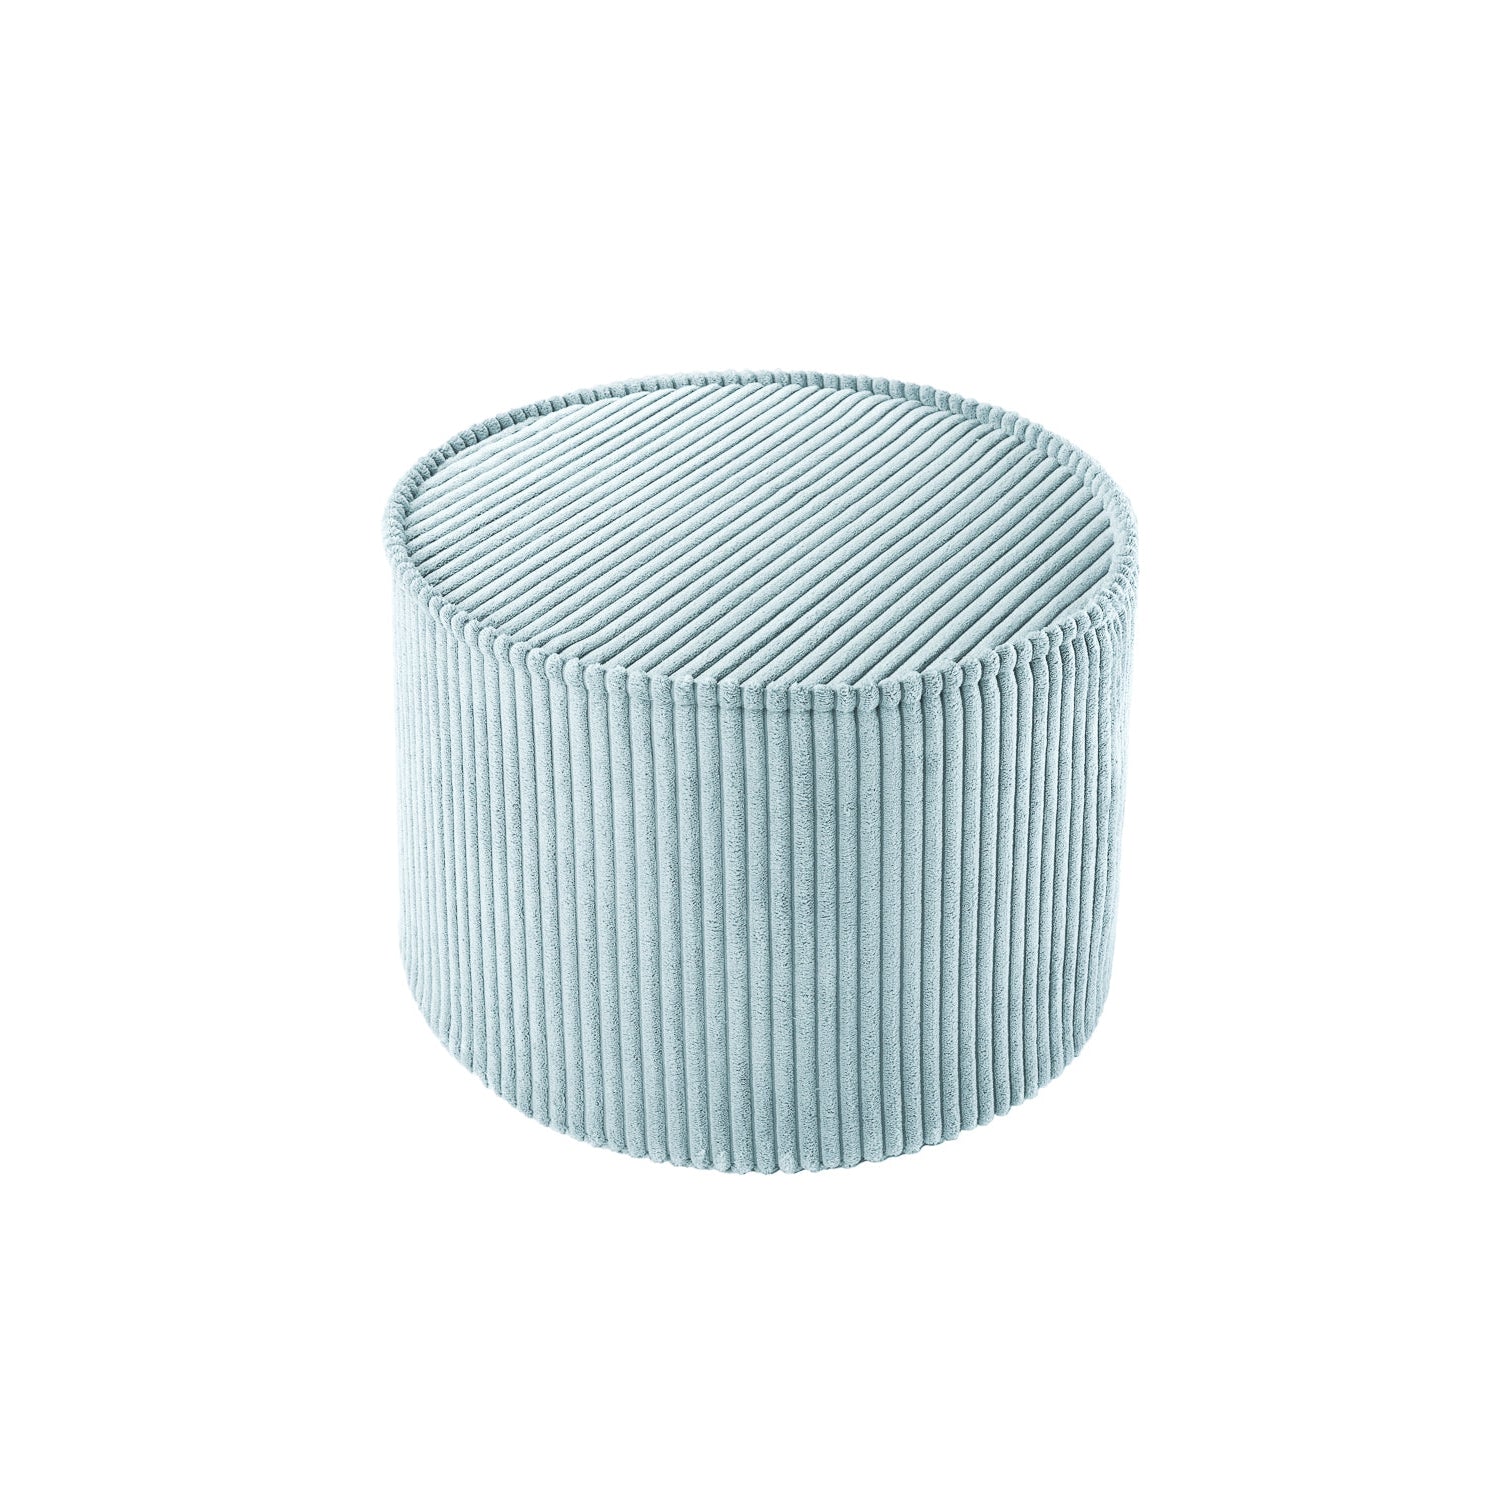 Wigiwama Peppermint Green Pouffe at Rugs by Roo